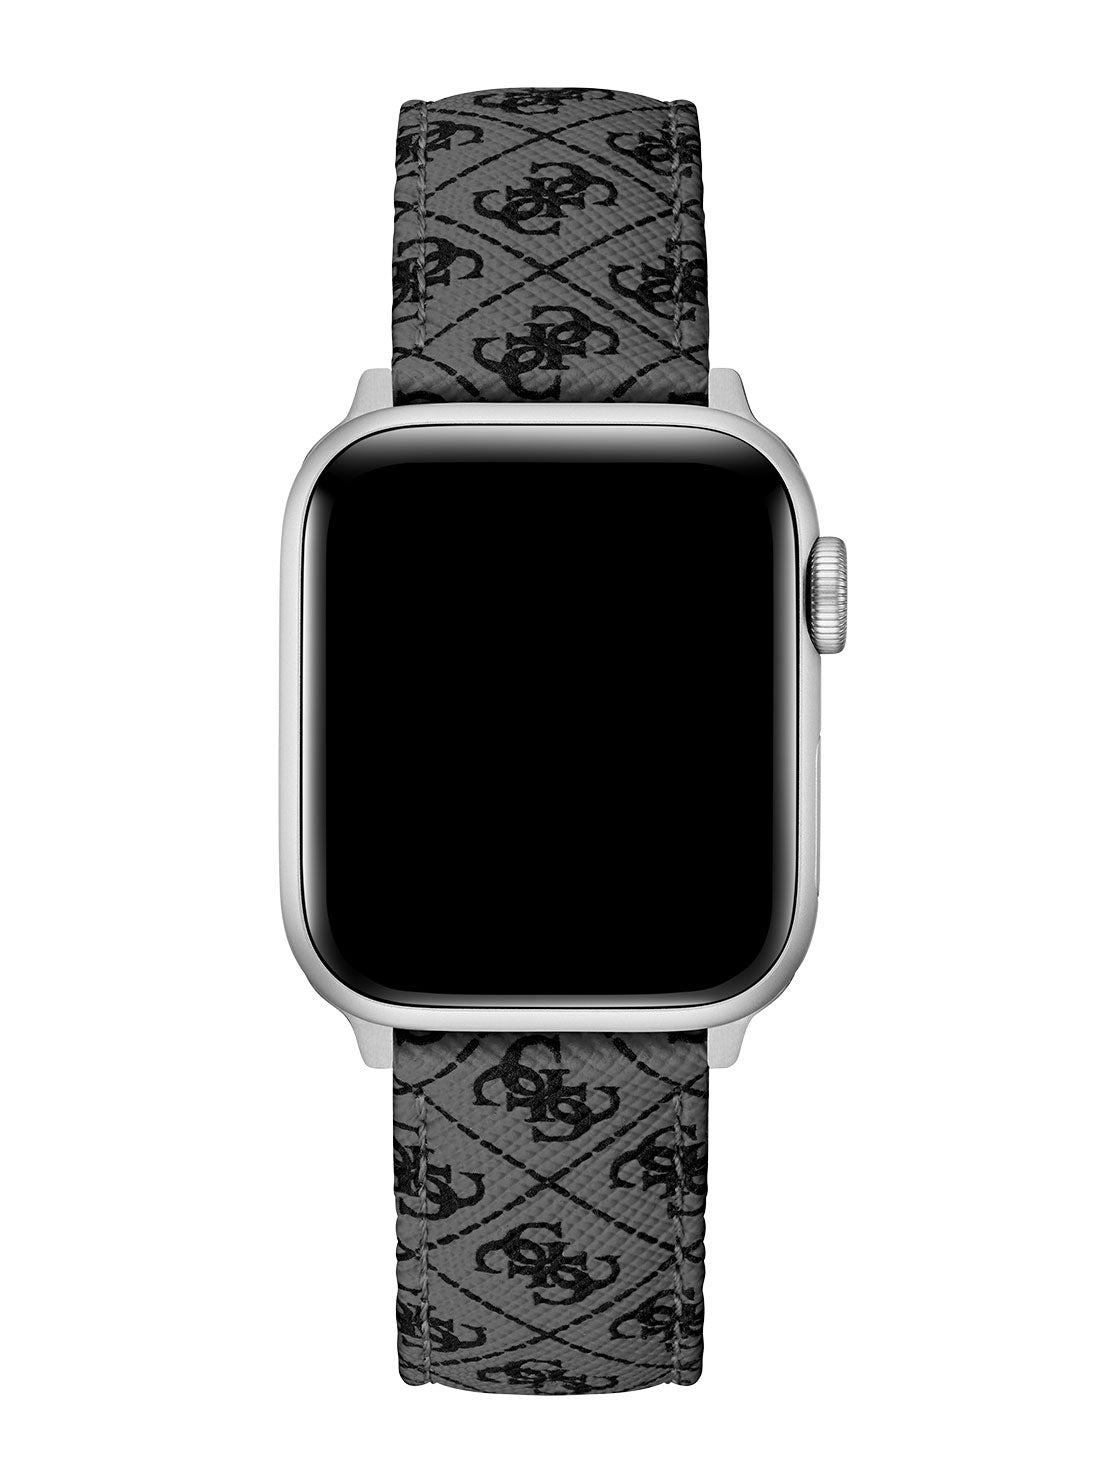 GUESS Women's Black Quattro G Leather Apple Watch Strap CS2001S2 Front View